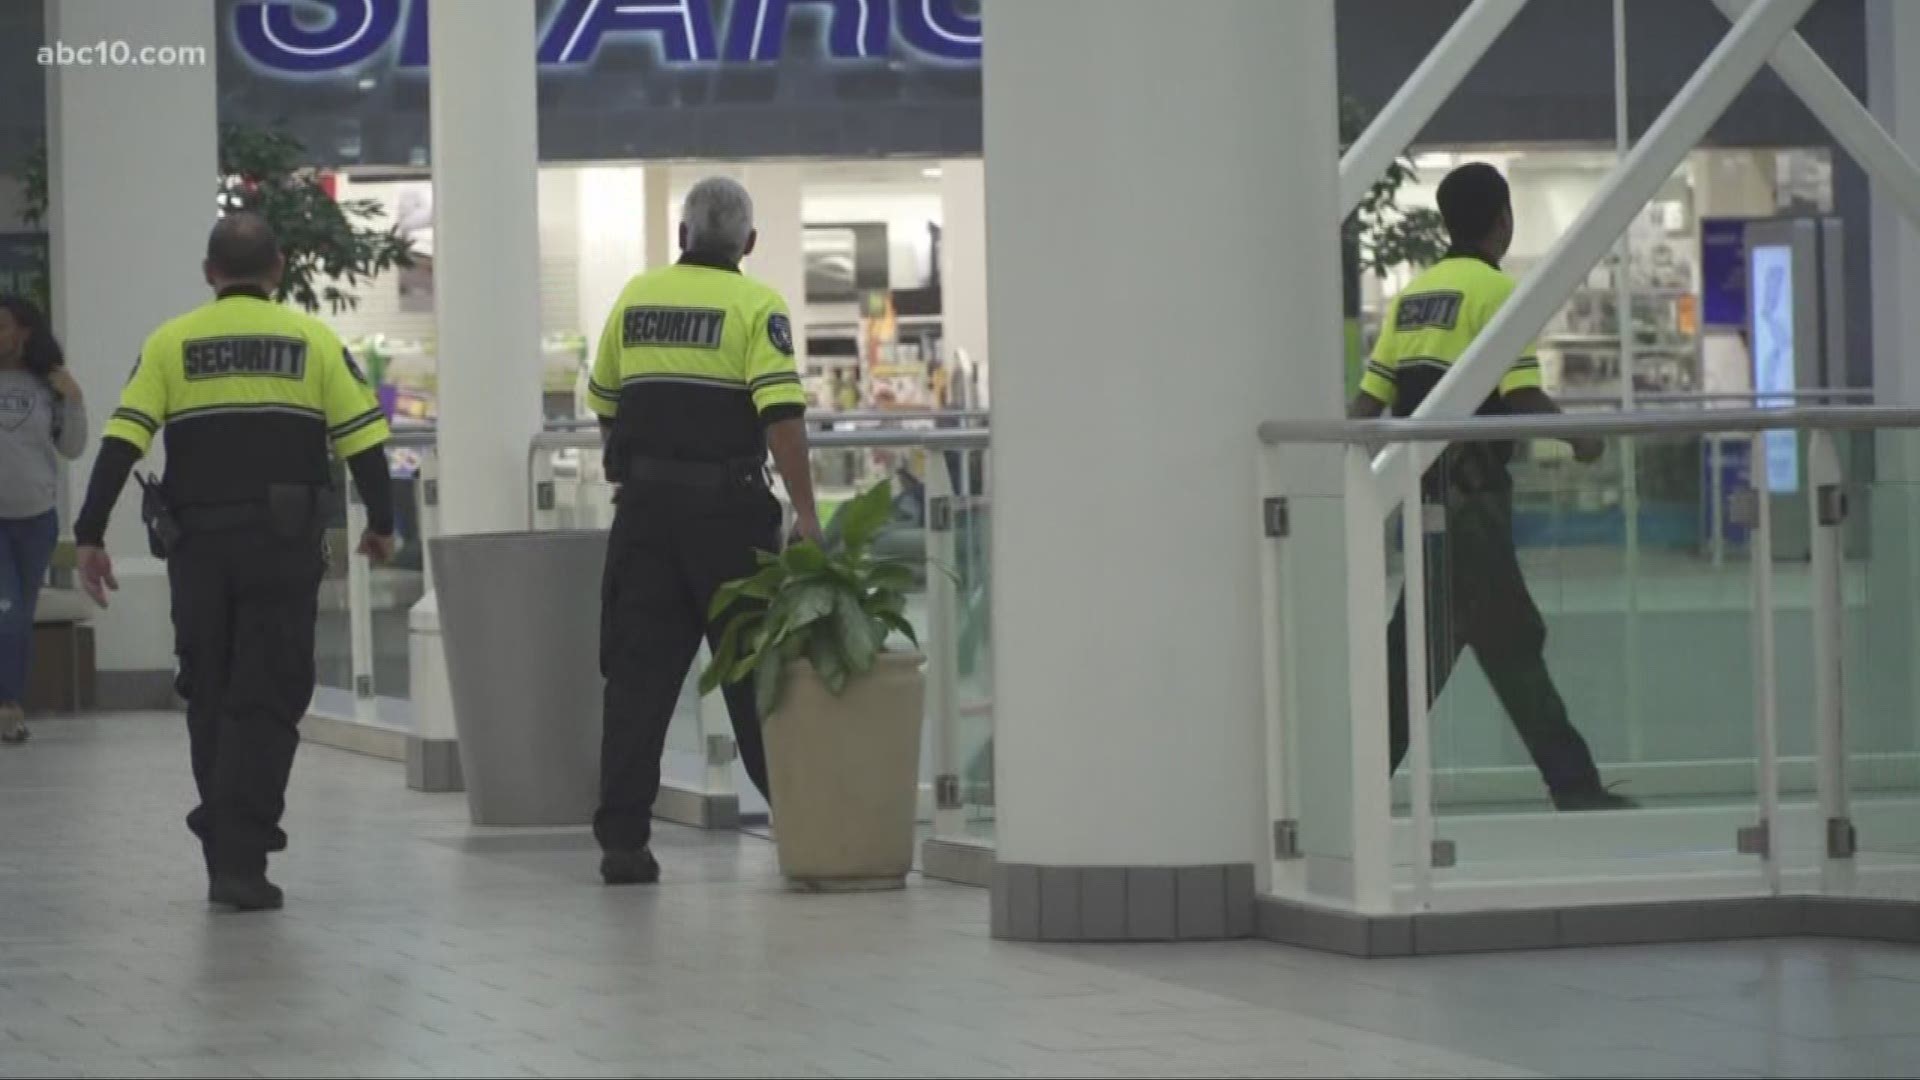 Leaders were passing out flyers Wednesday night at Arden Fair Mall, hoping to talk to some youth. The events will be free and include free food, prizes, and surprises for the kids.